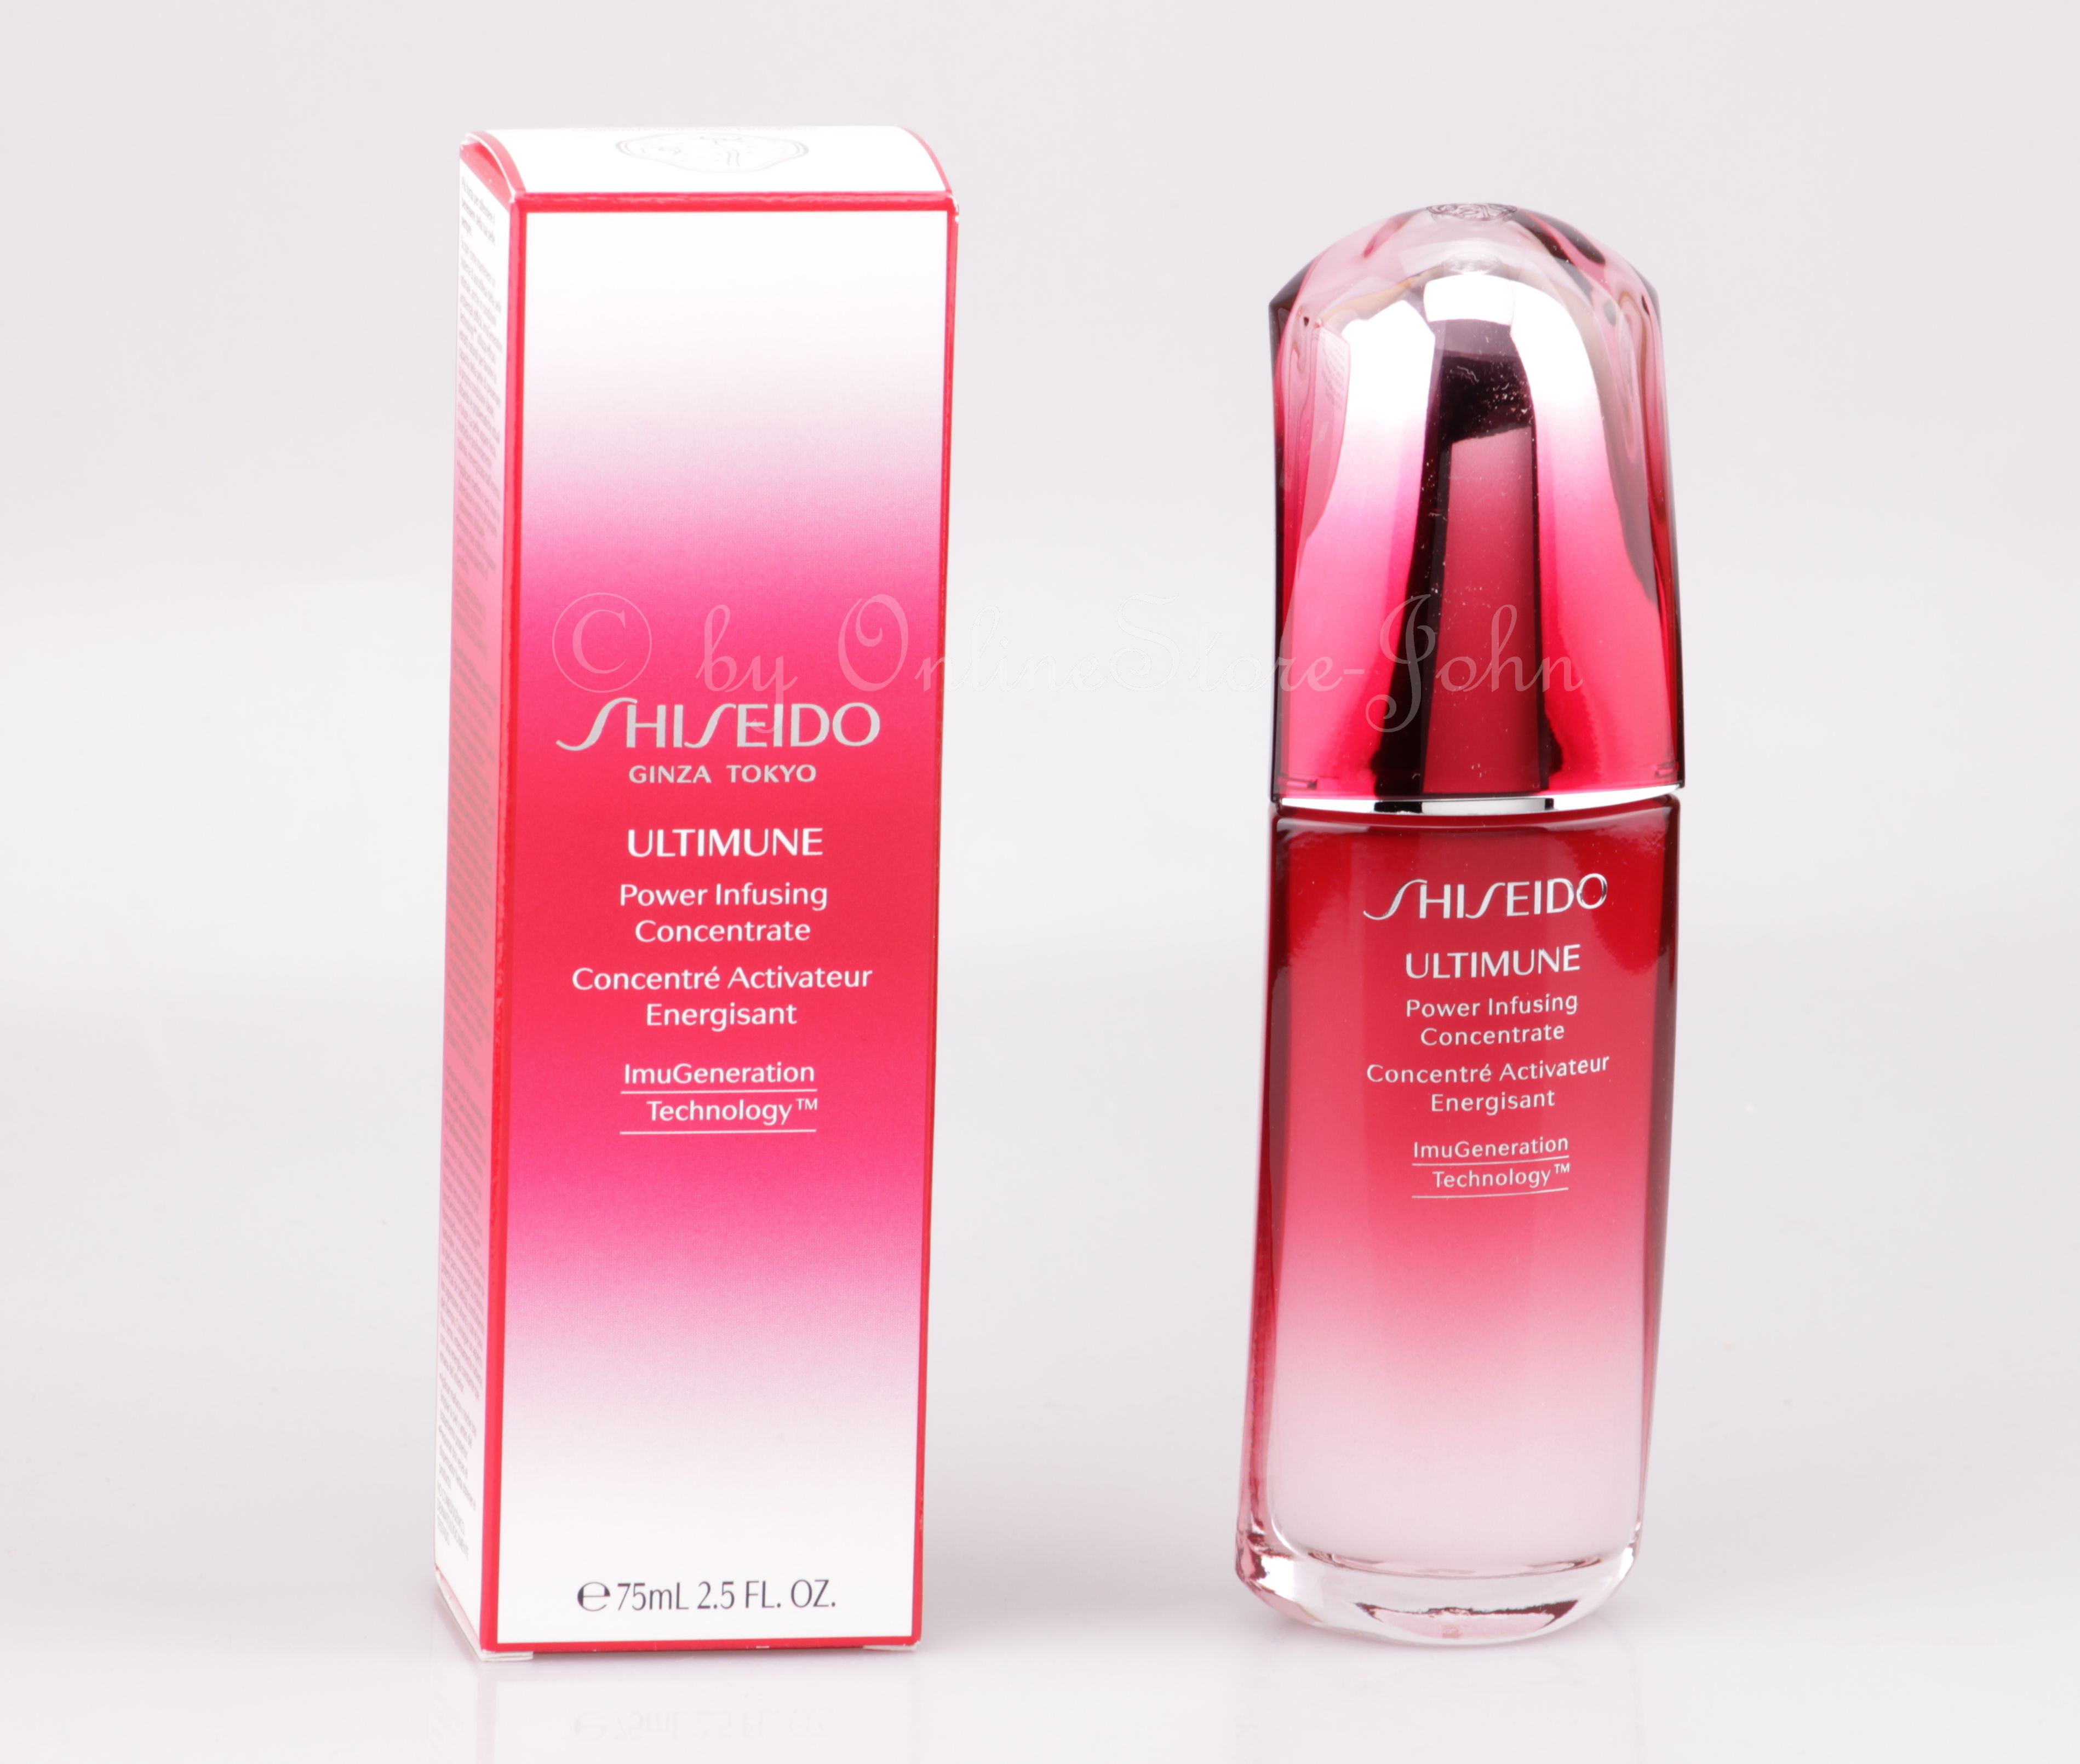 Shiseido power infusing concentrate. Ultimune концентрат шисейдо. Ultimune концентрат шисейдо Power infusing. Shiseido Ultimate Power infusing. Ultimune Ginza шисейдо 30 мл.